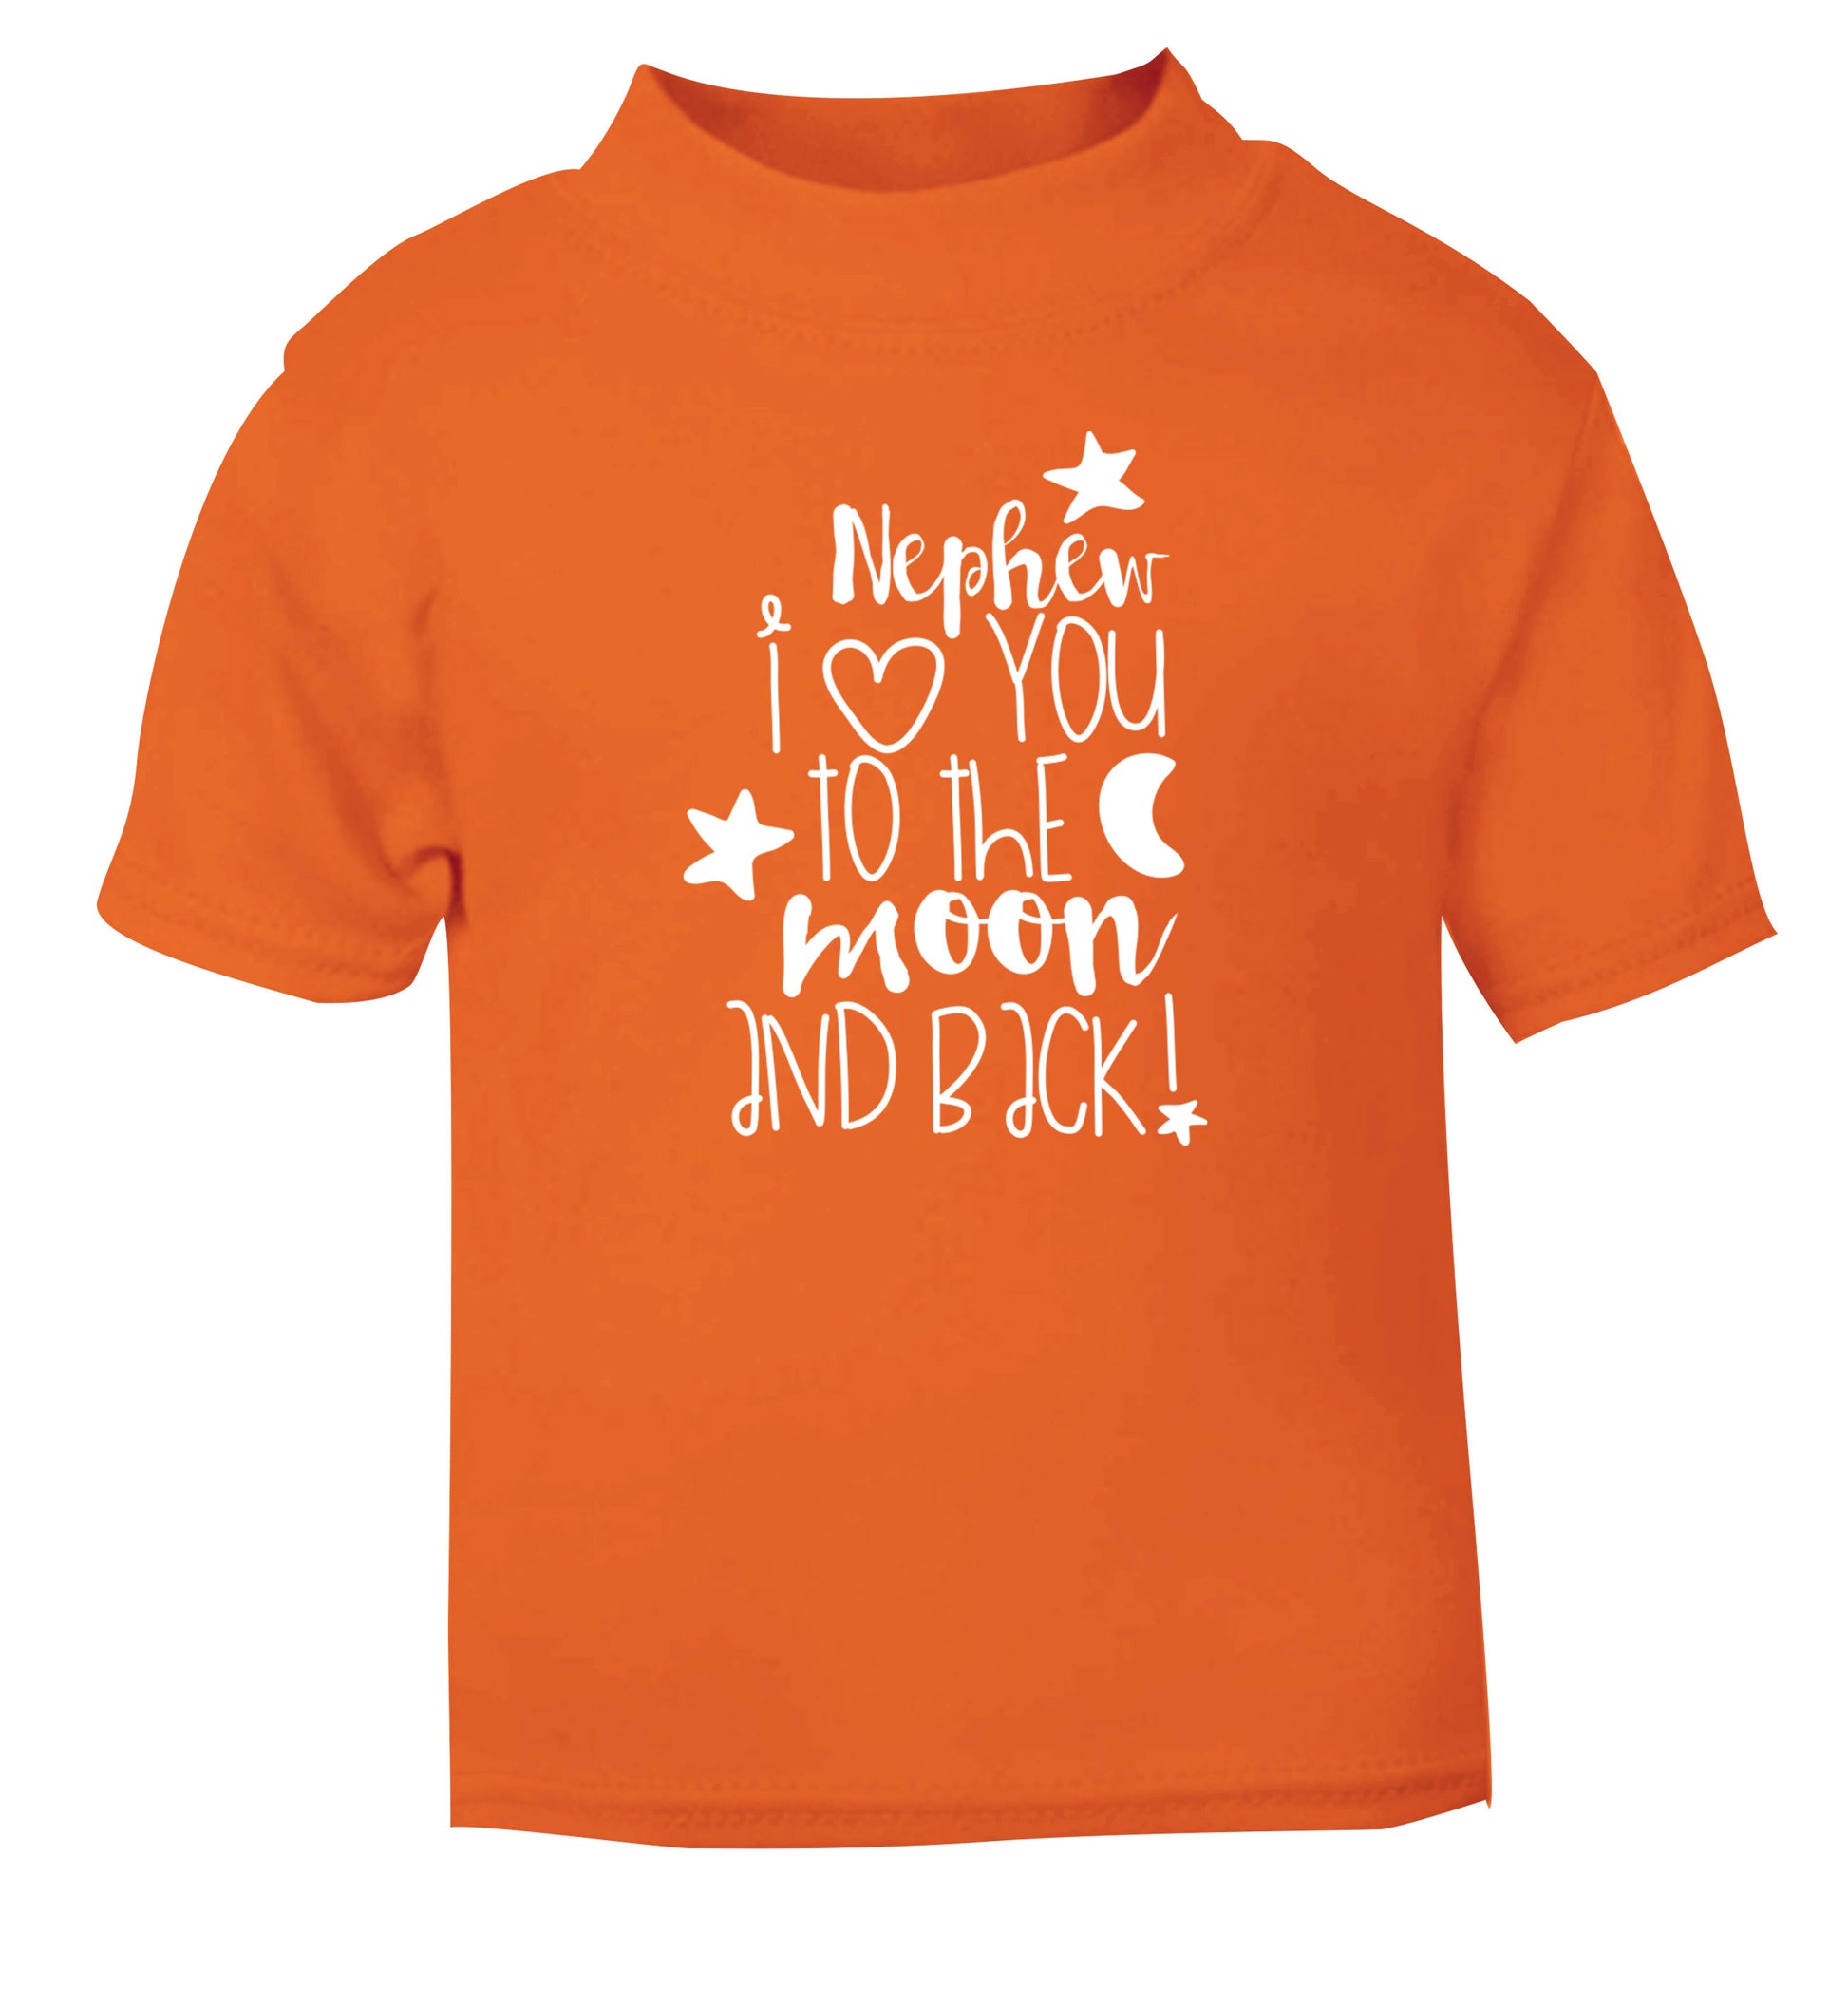 Nephew I love you to the moon and back orange Baby Toddler Tshirt 2 Years